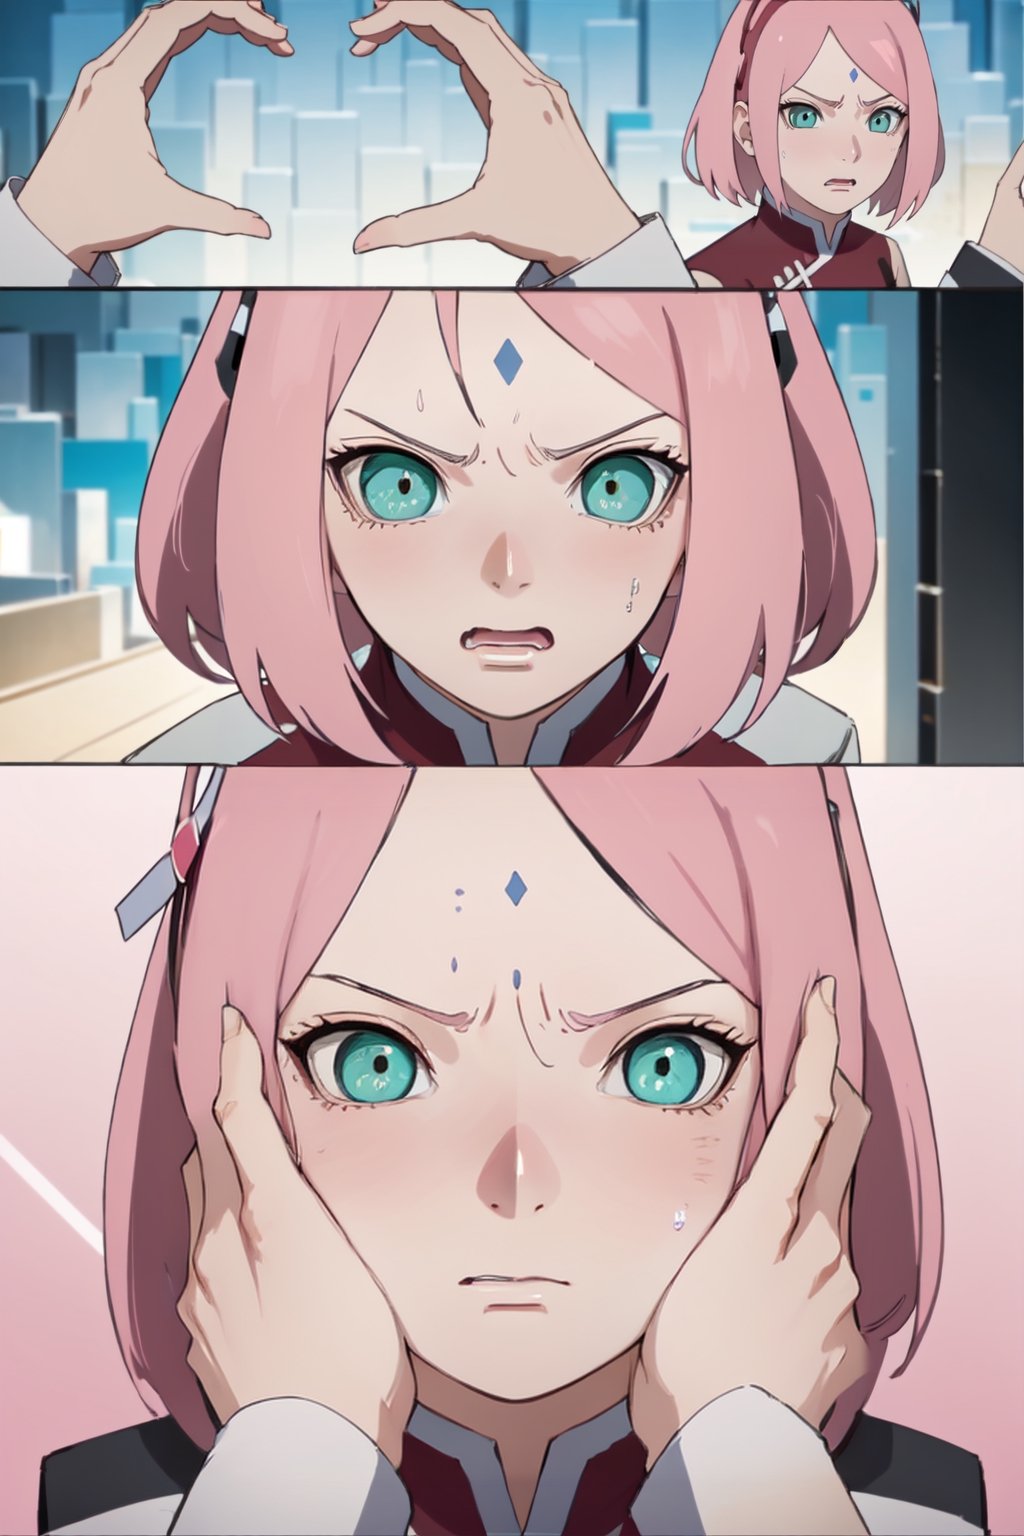 1 girl, cute face, cute eyes, Highly detailed, High Quality, Masterpiece, beautiful, IncrsSnootChallenge, comic, pov hands, , Twitter-chan, hair ornament, white shirt, , annoyed, angry, ,IncrsSnootChallenge,haruno sakura